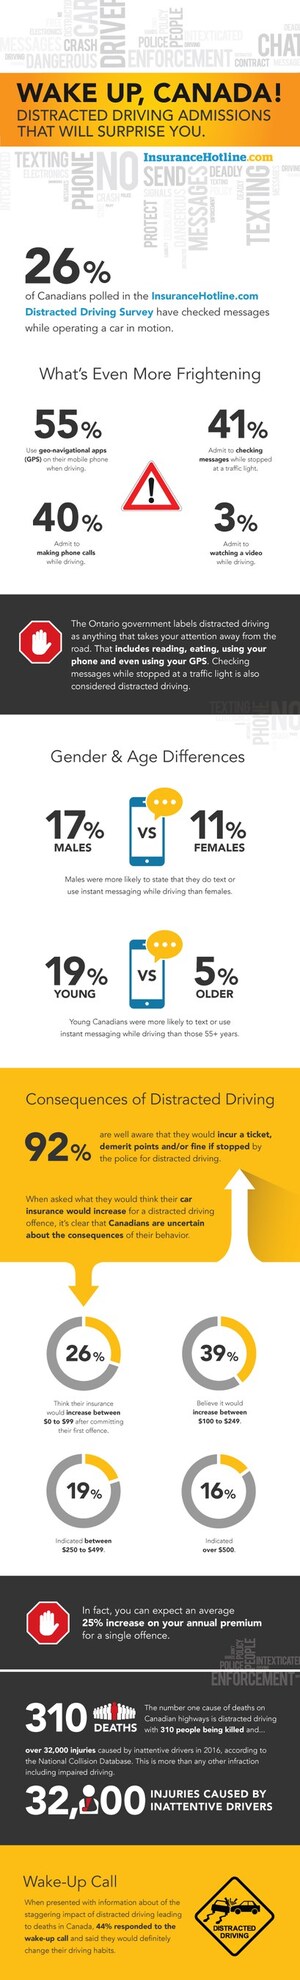 One quarter of Canadians admit to checking messages while driving, national survey reveals